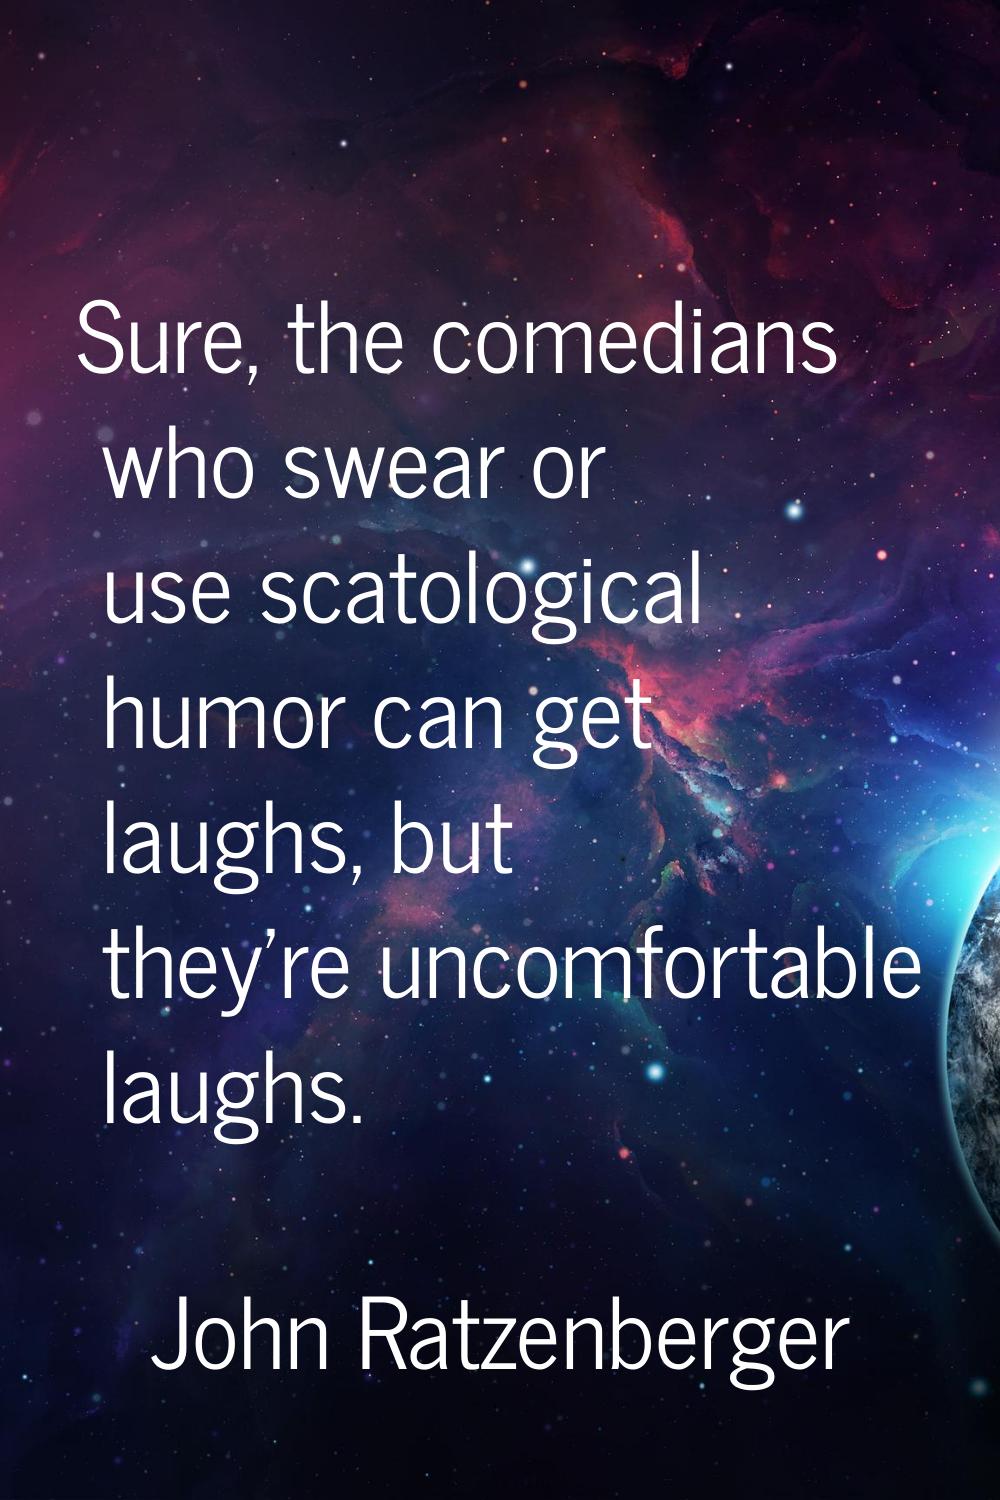 Sure, the comedians who swear or use scatological humor can get laughs, but they're uncomfortable l